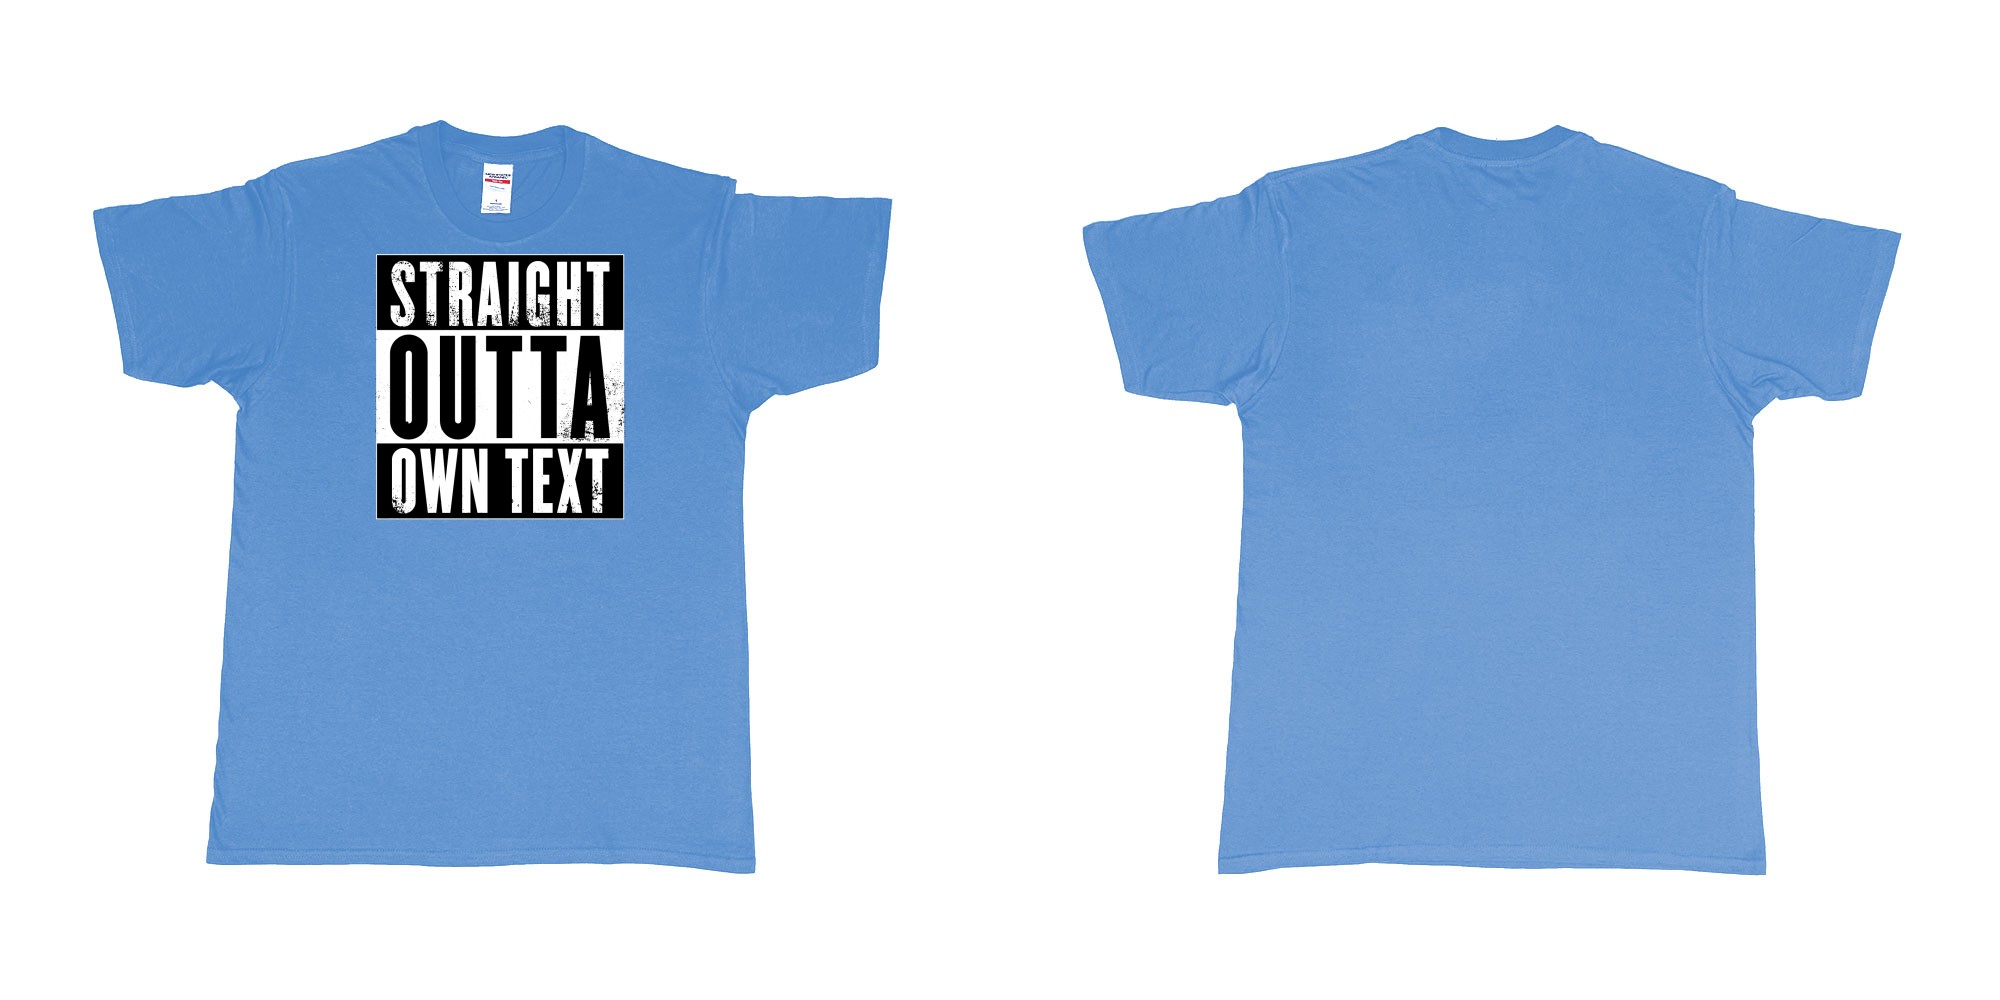 Custom tshirt design Straight Outta Compton in fabric color carolina-blue choice your own text made in Bali by The Pirate Way